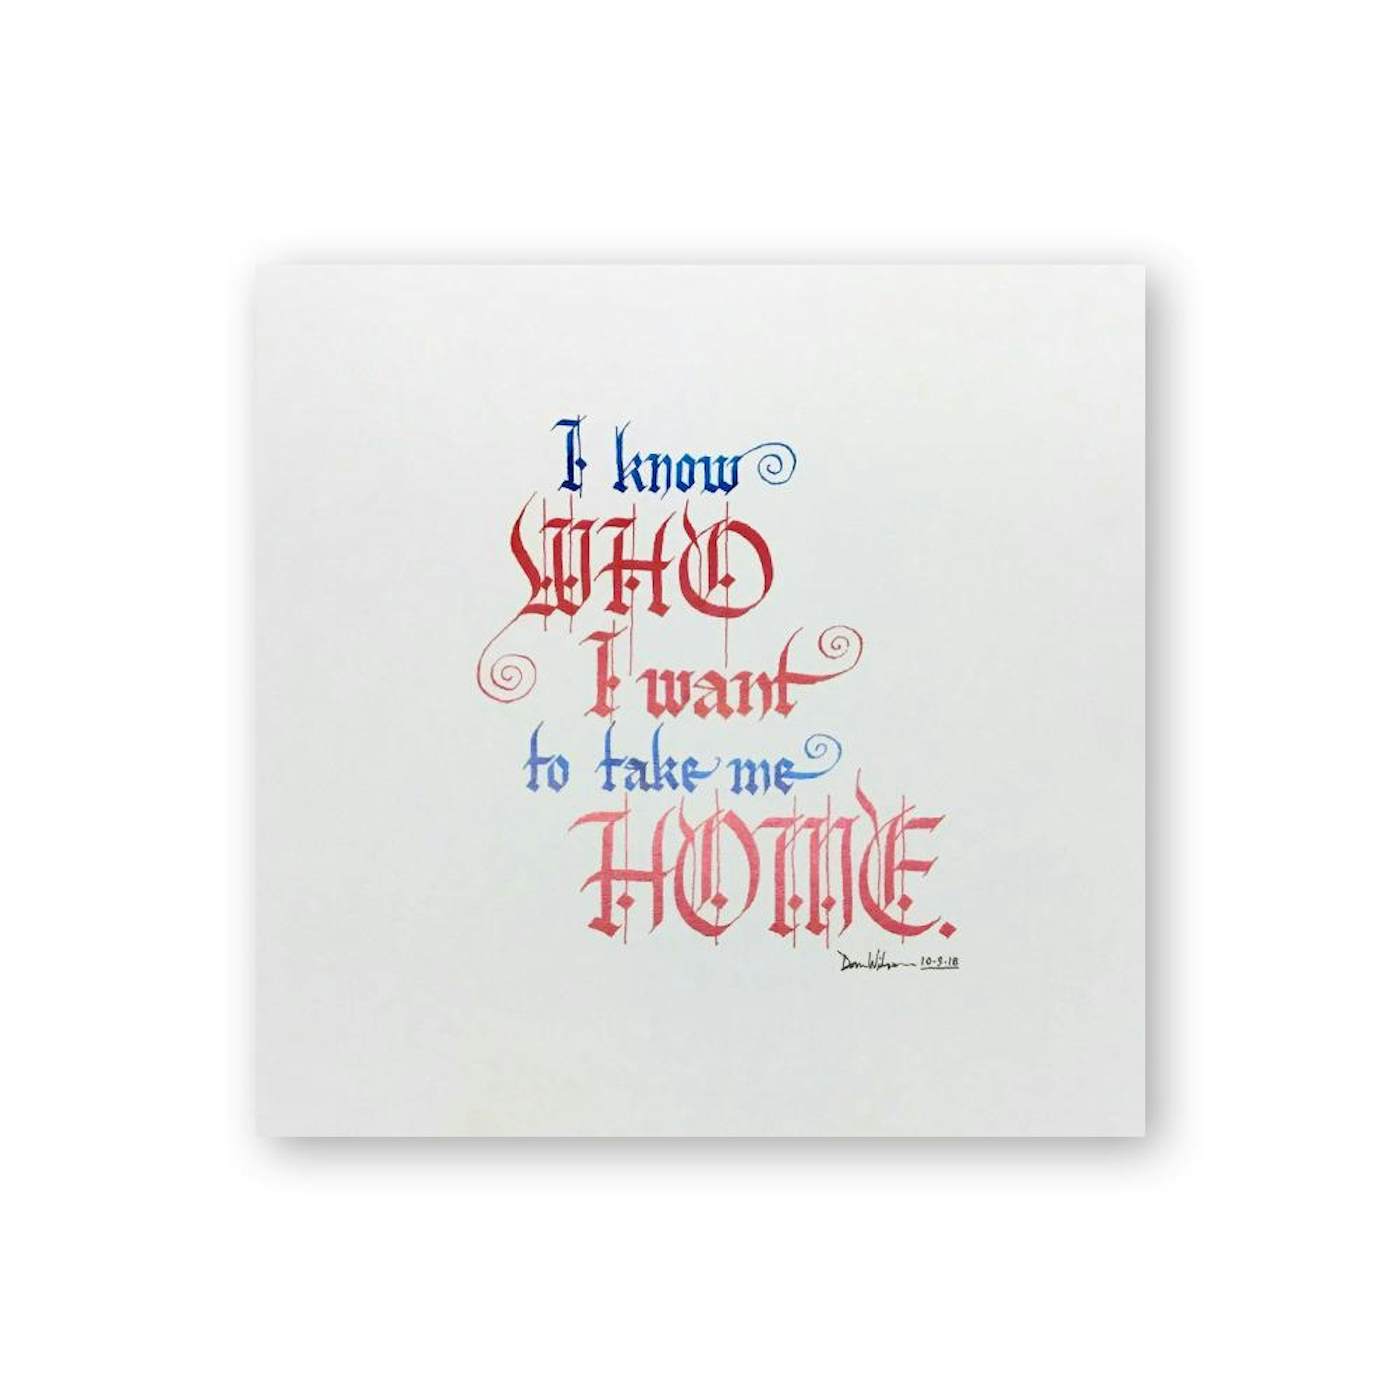 Semisonic - Closing Time Calligraphy Print - I Know Who I Want to Take Me Home